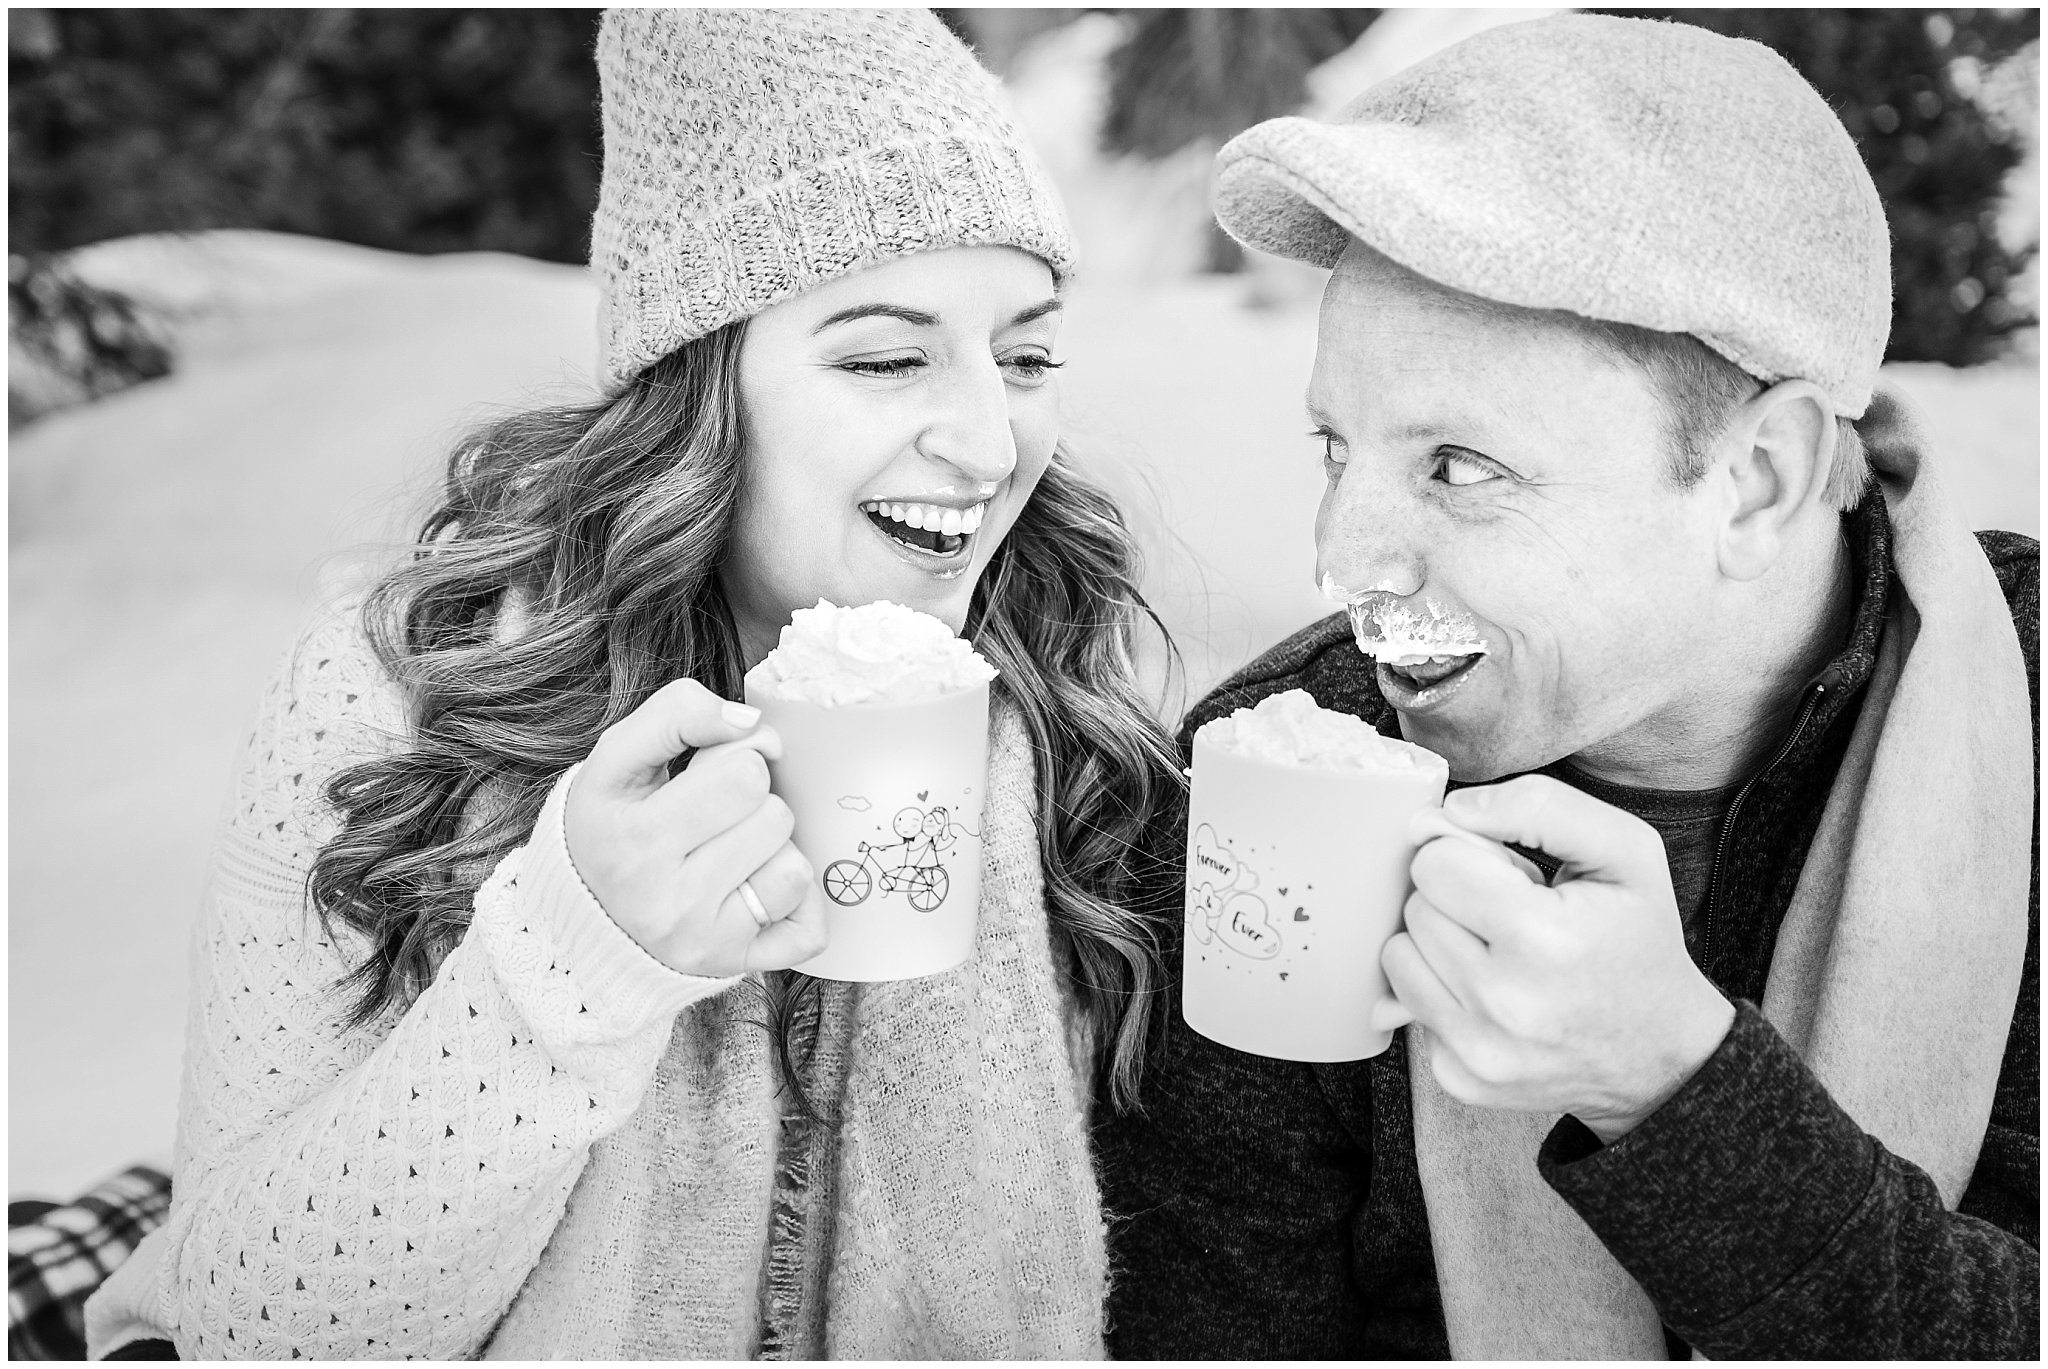 Couple in cute winter outfits having a hot chocolate picnic in the Utah mountains in the snow | Big Cottonwood Canyon Winter Engagement Session | Jessie and Dallin Photography